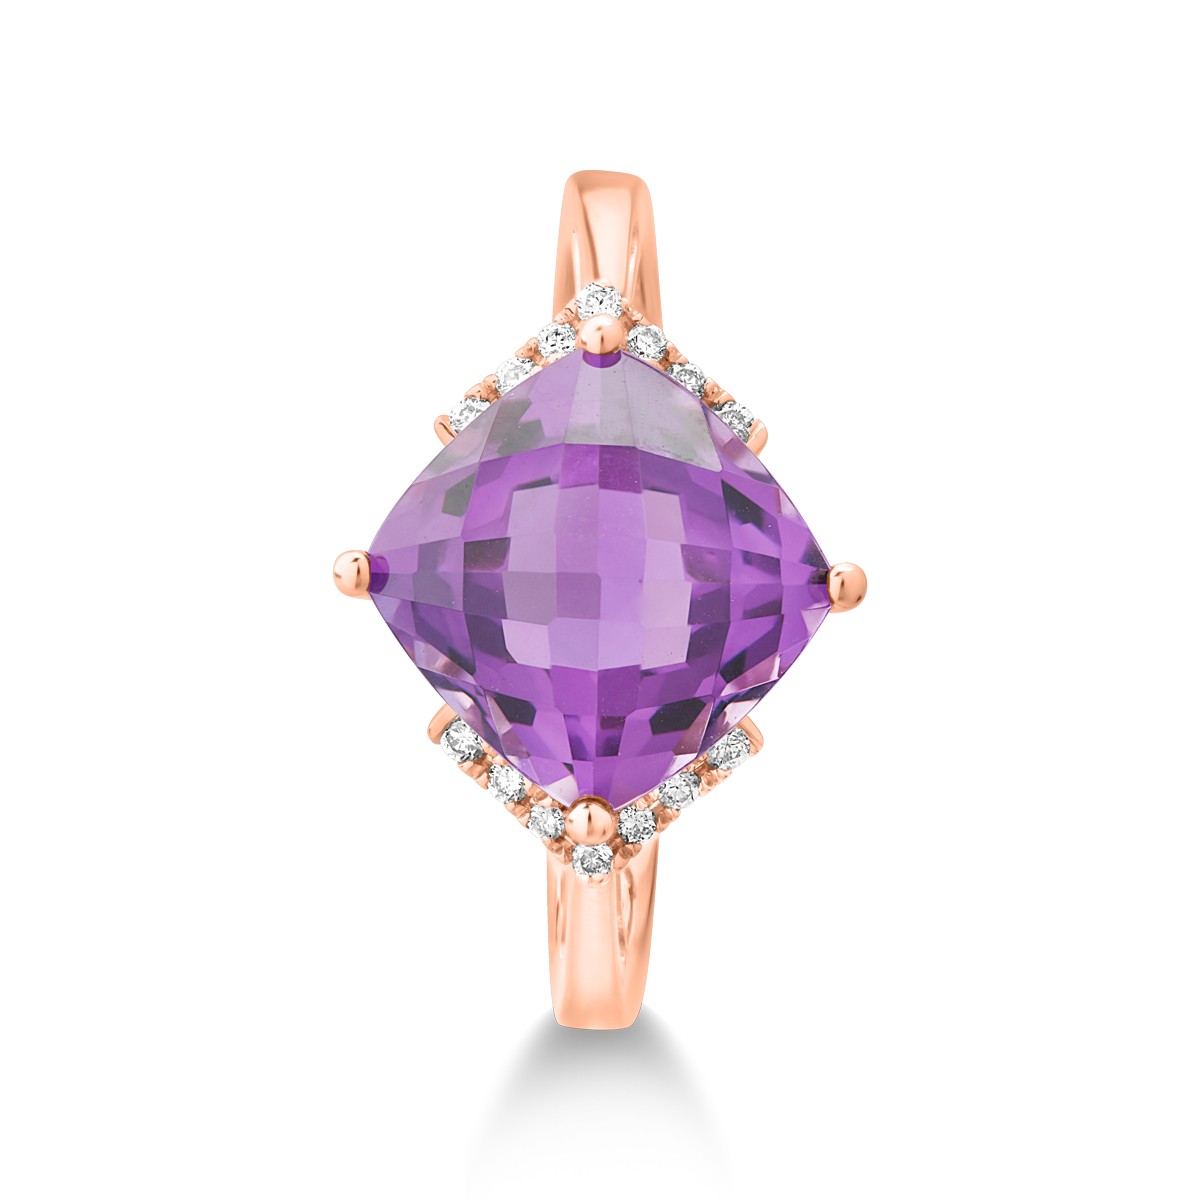 18K rose gold ring with 3.3ct amethyst and 0.08ct diamonds